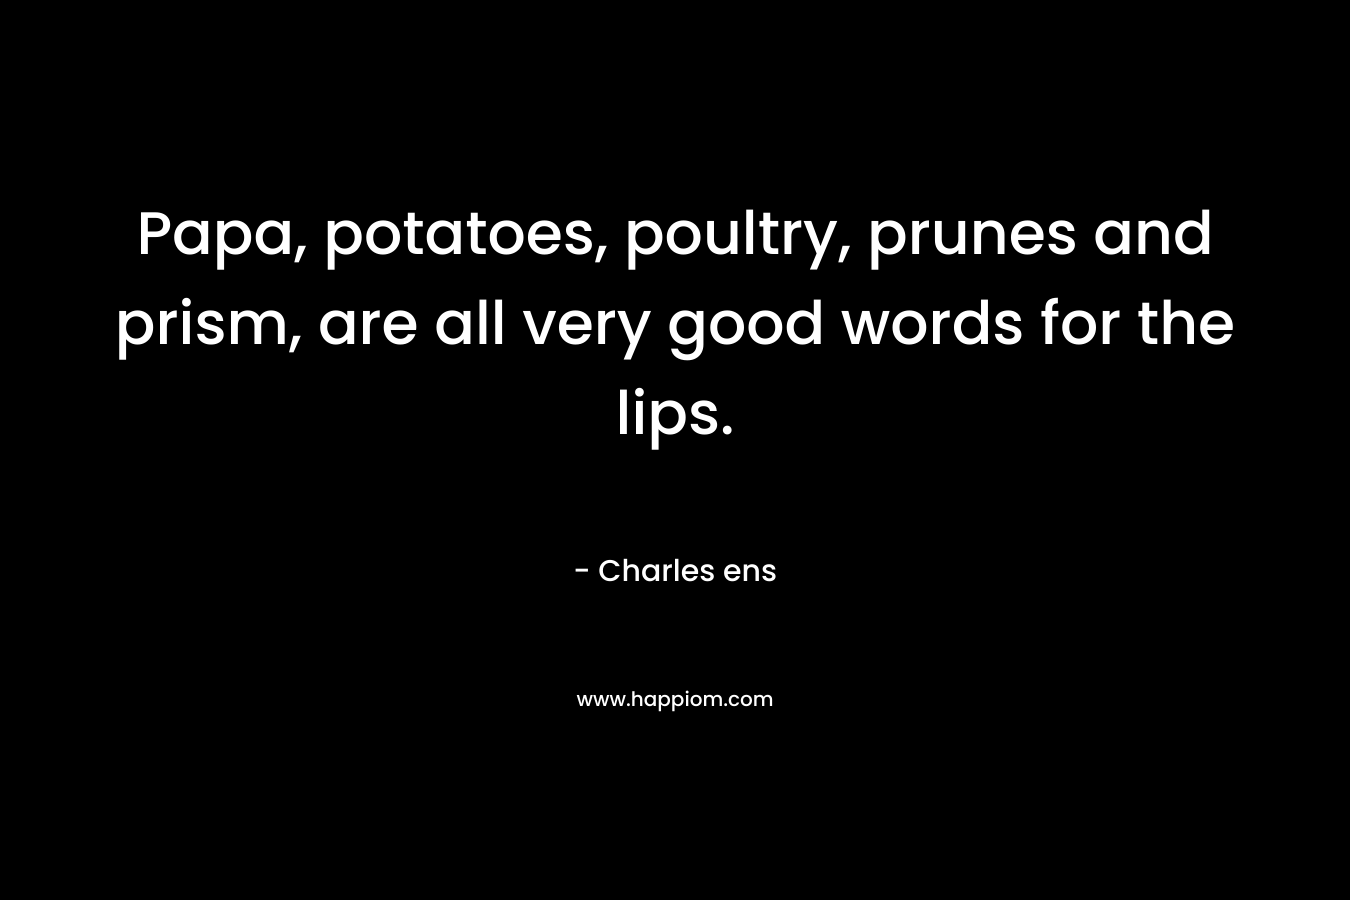 Papa, potatoes, poultry, prunes and prism, are all very good words for the lips. – Charles ens